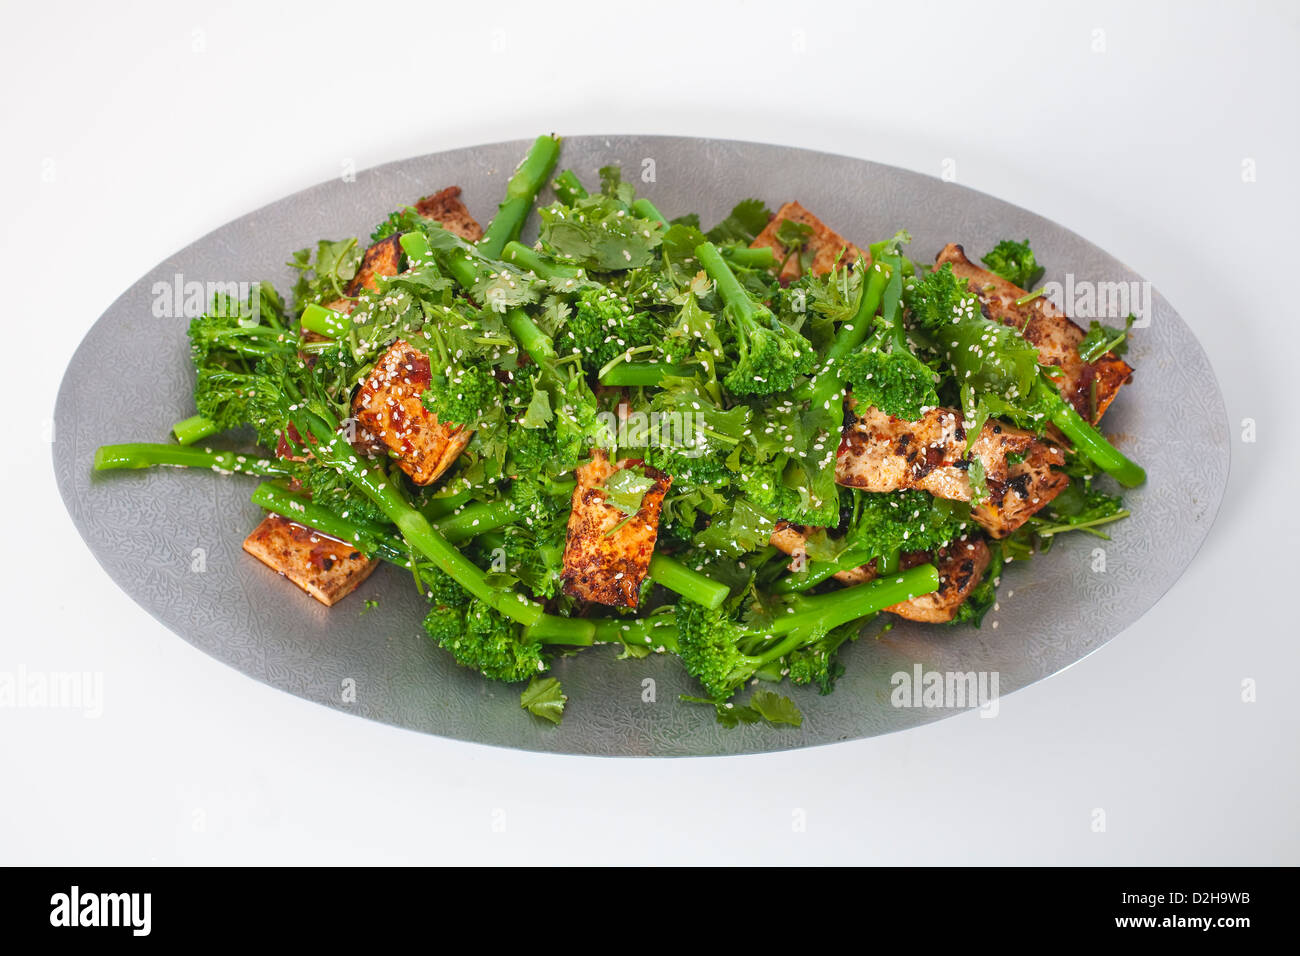 Ottolenghi's broccolini with tofu, sesame and coriander at Yotam Ottolenghi's restaurant in Islington, London, UK Stock Photo